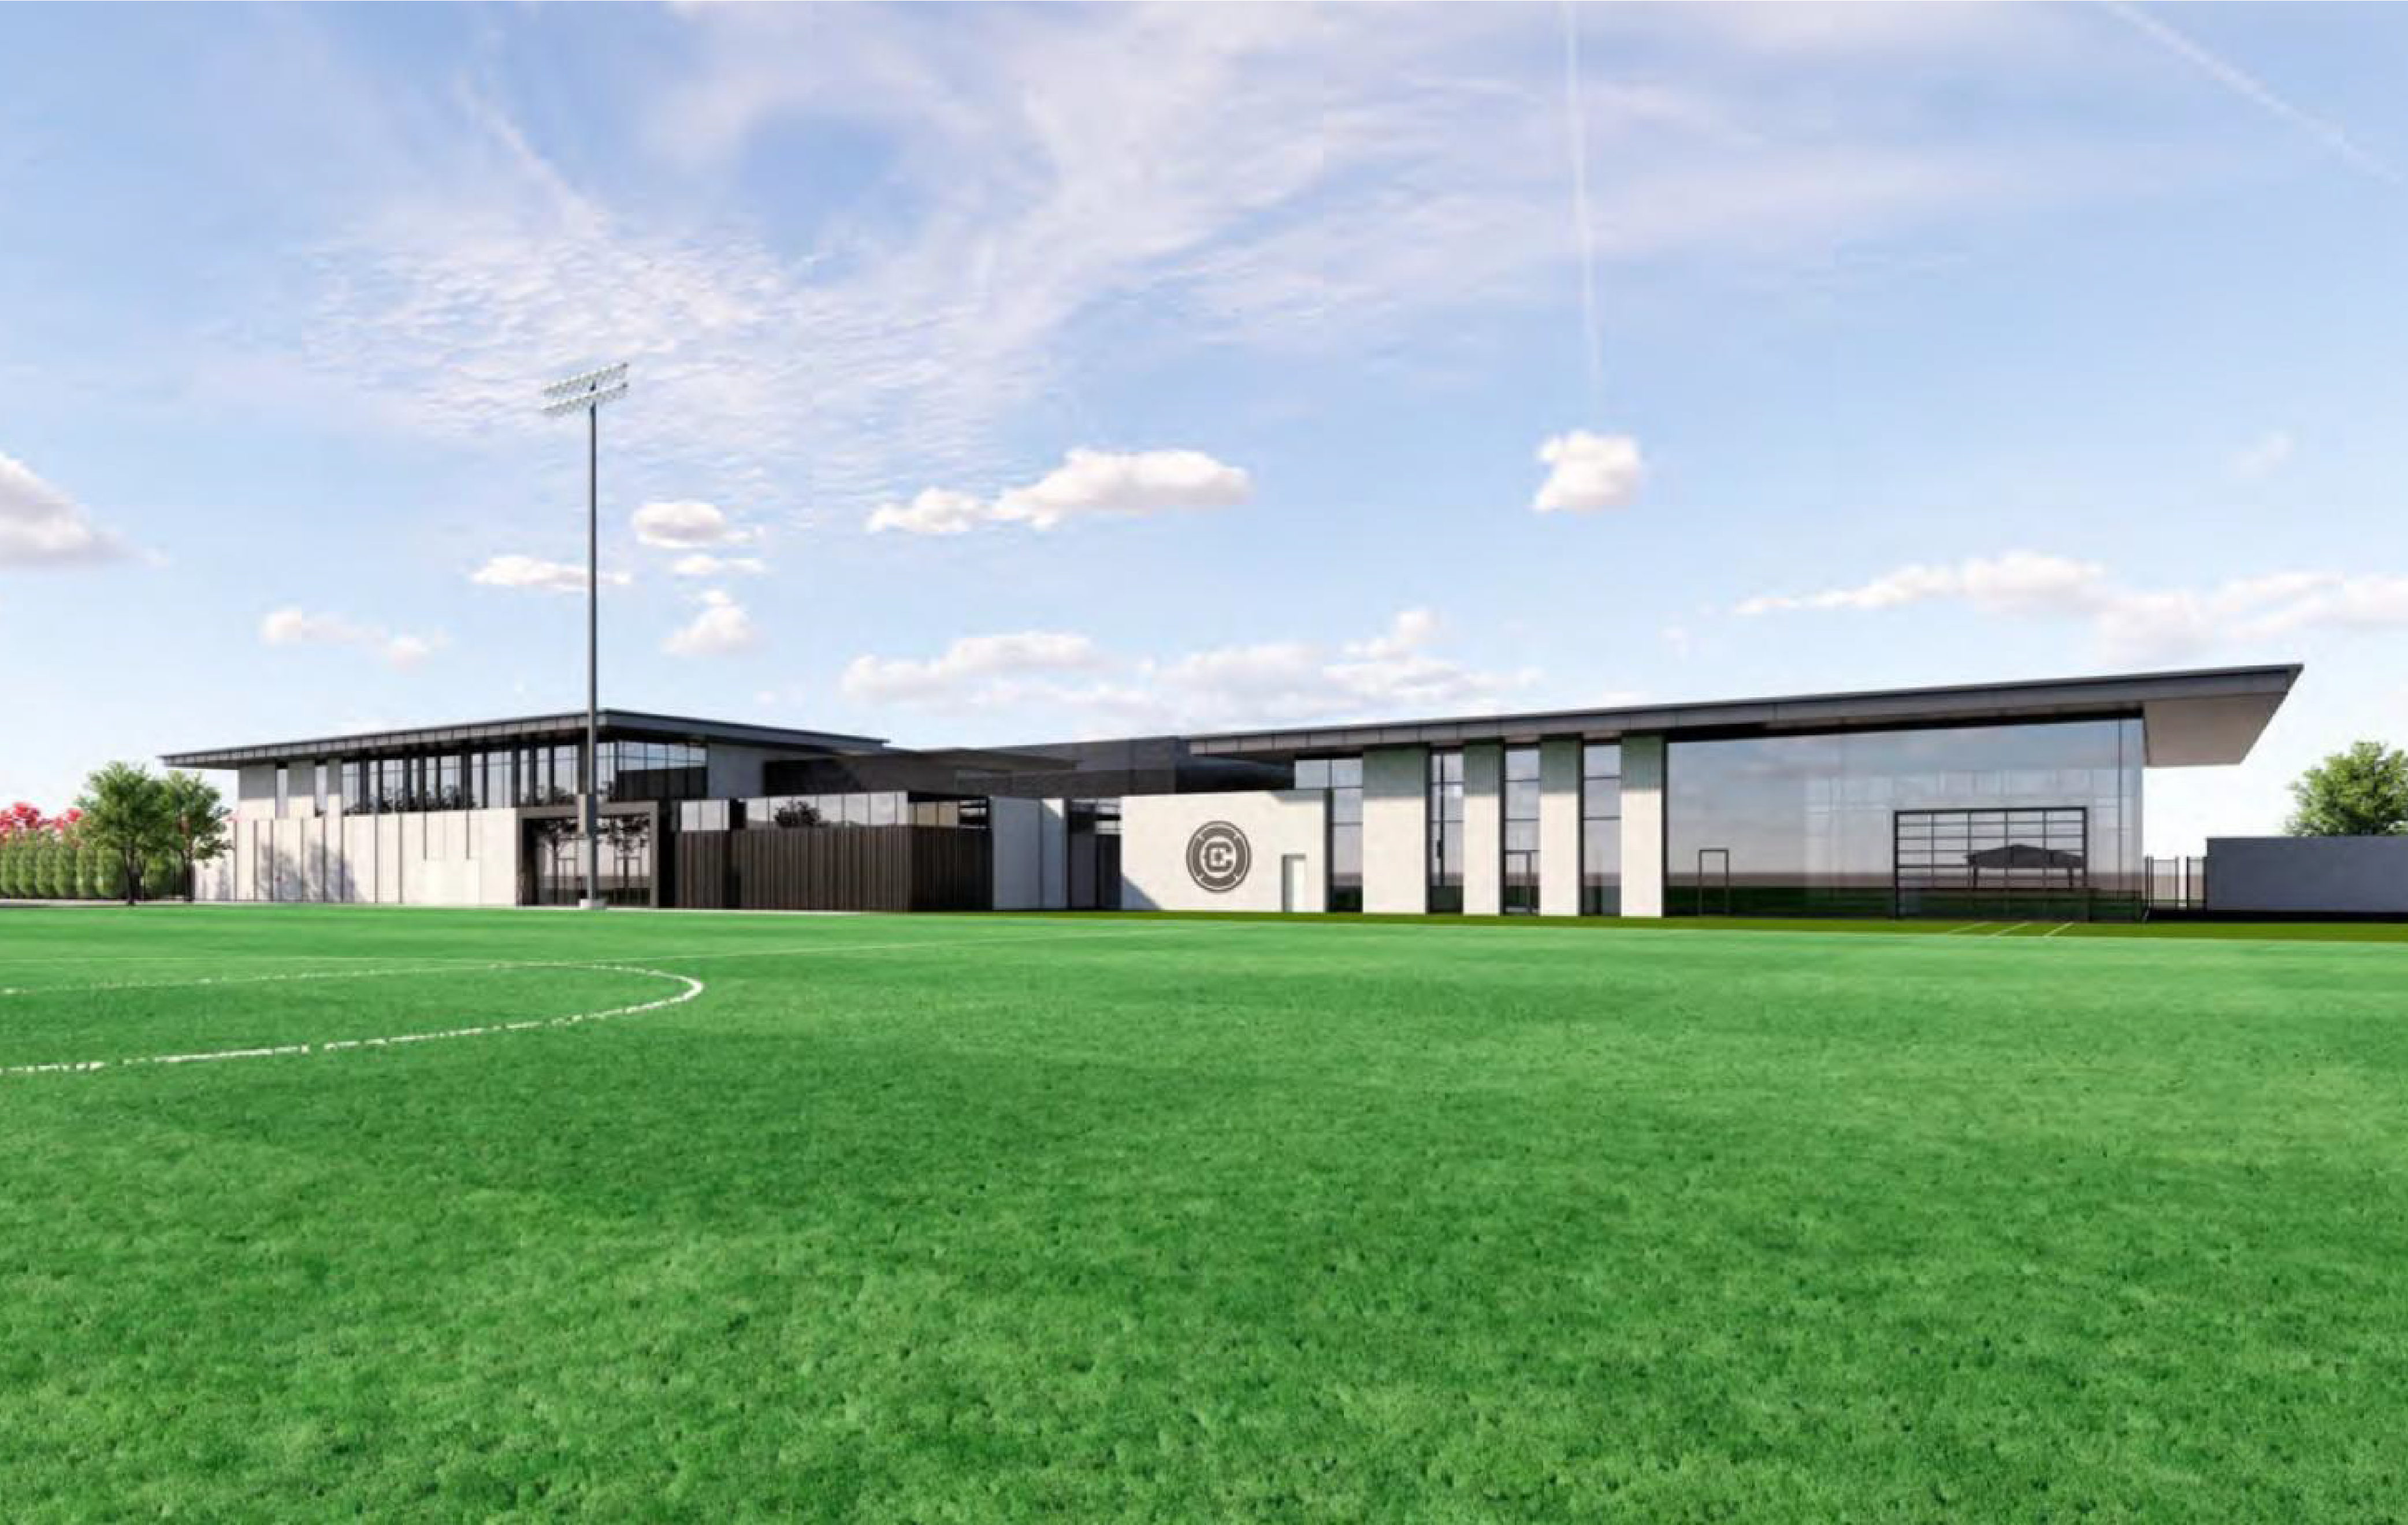 Updated Plans Revealed For Chicago Fire Training Facility In Near West Side  - Chicago YIMBY